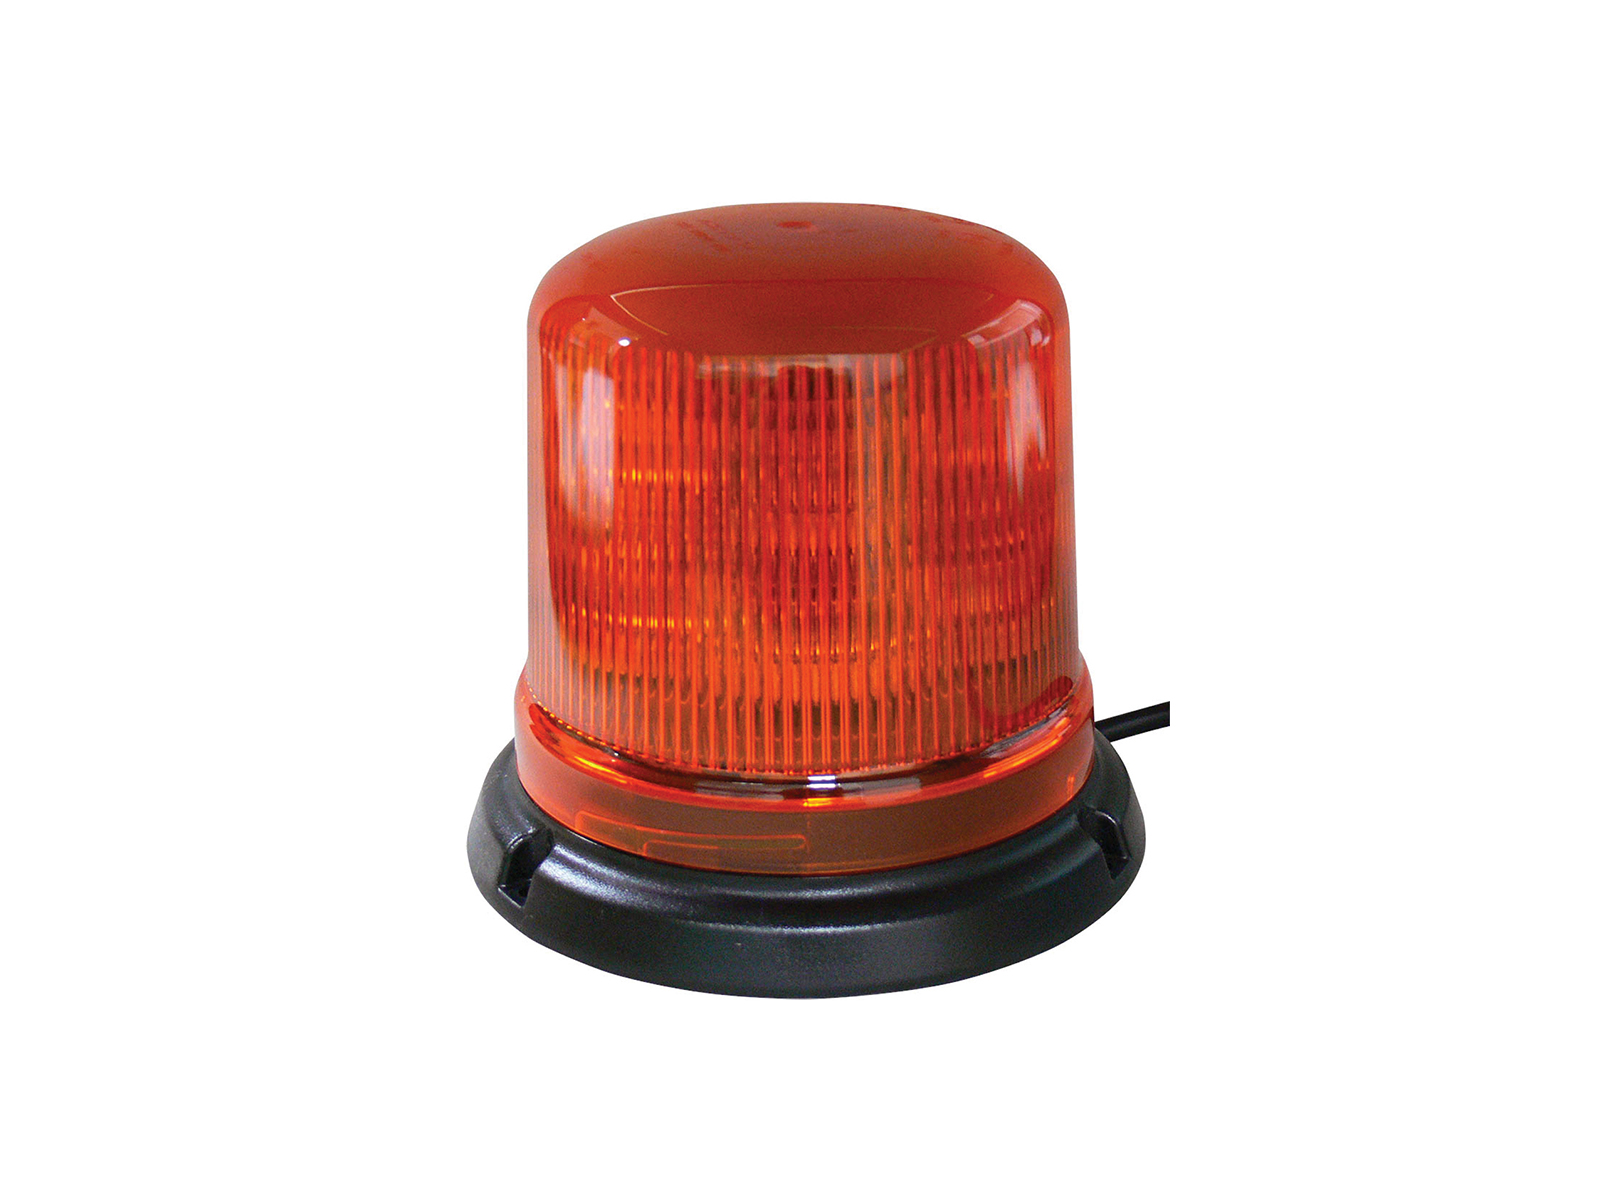 B14 Atom LED Beacon with 14 Built-In Flash Patterns Amber Unlit No Cable